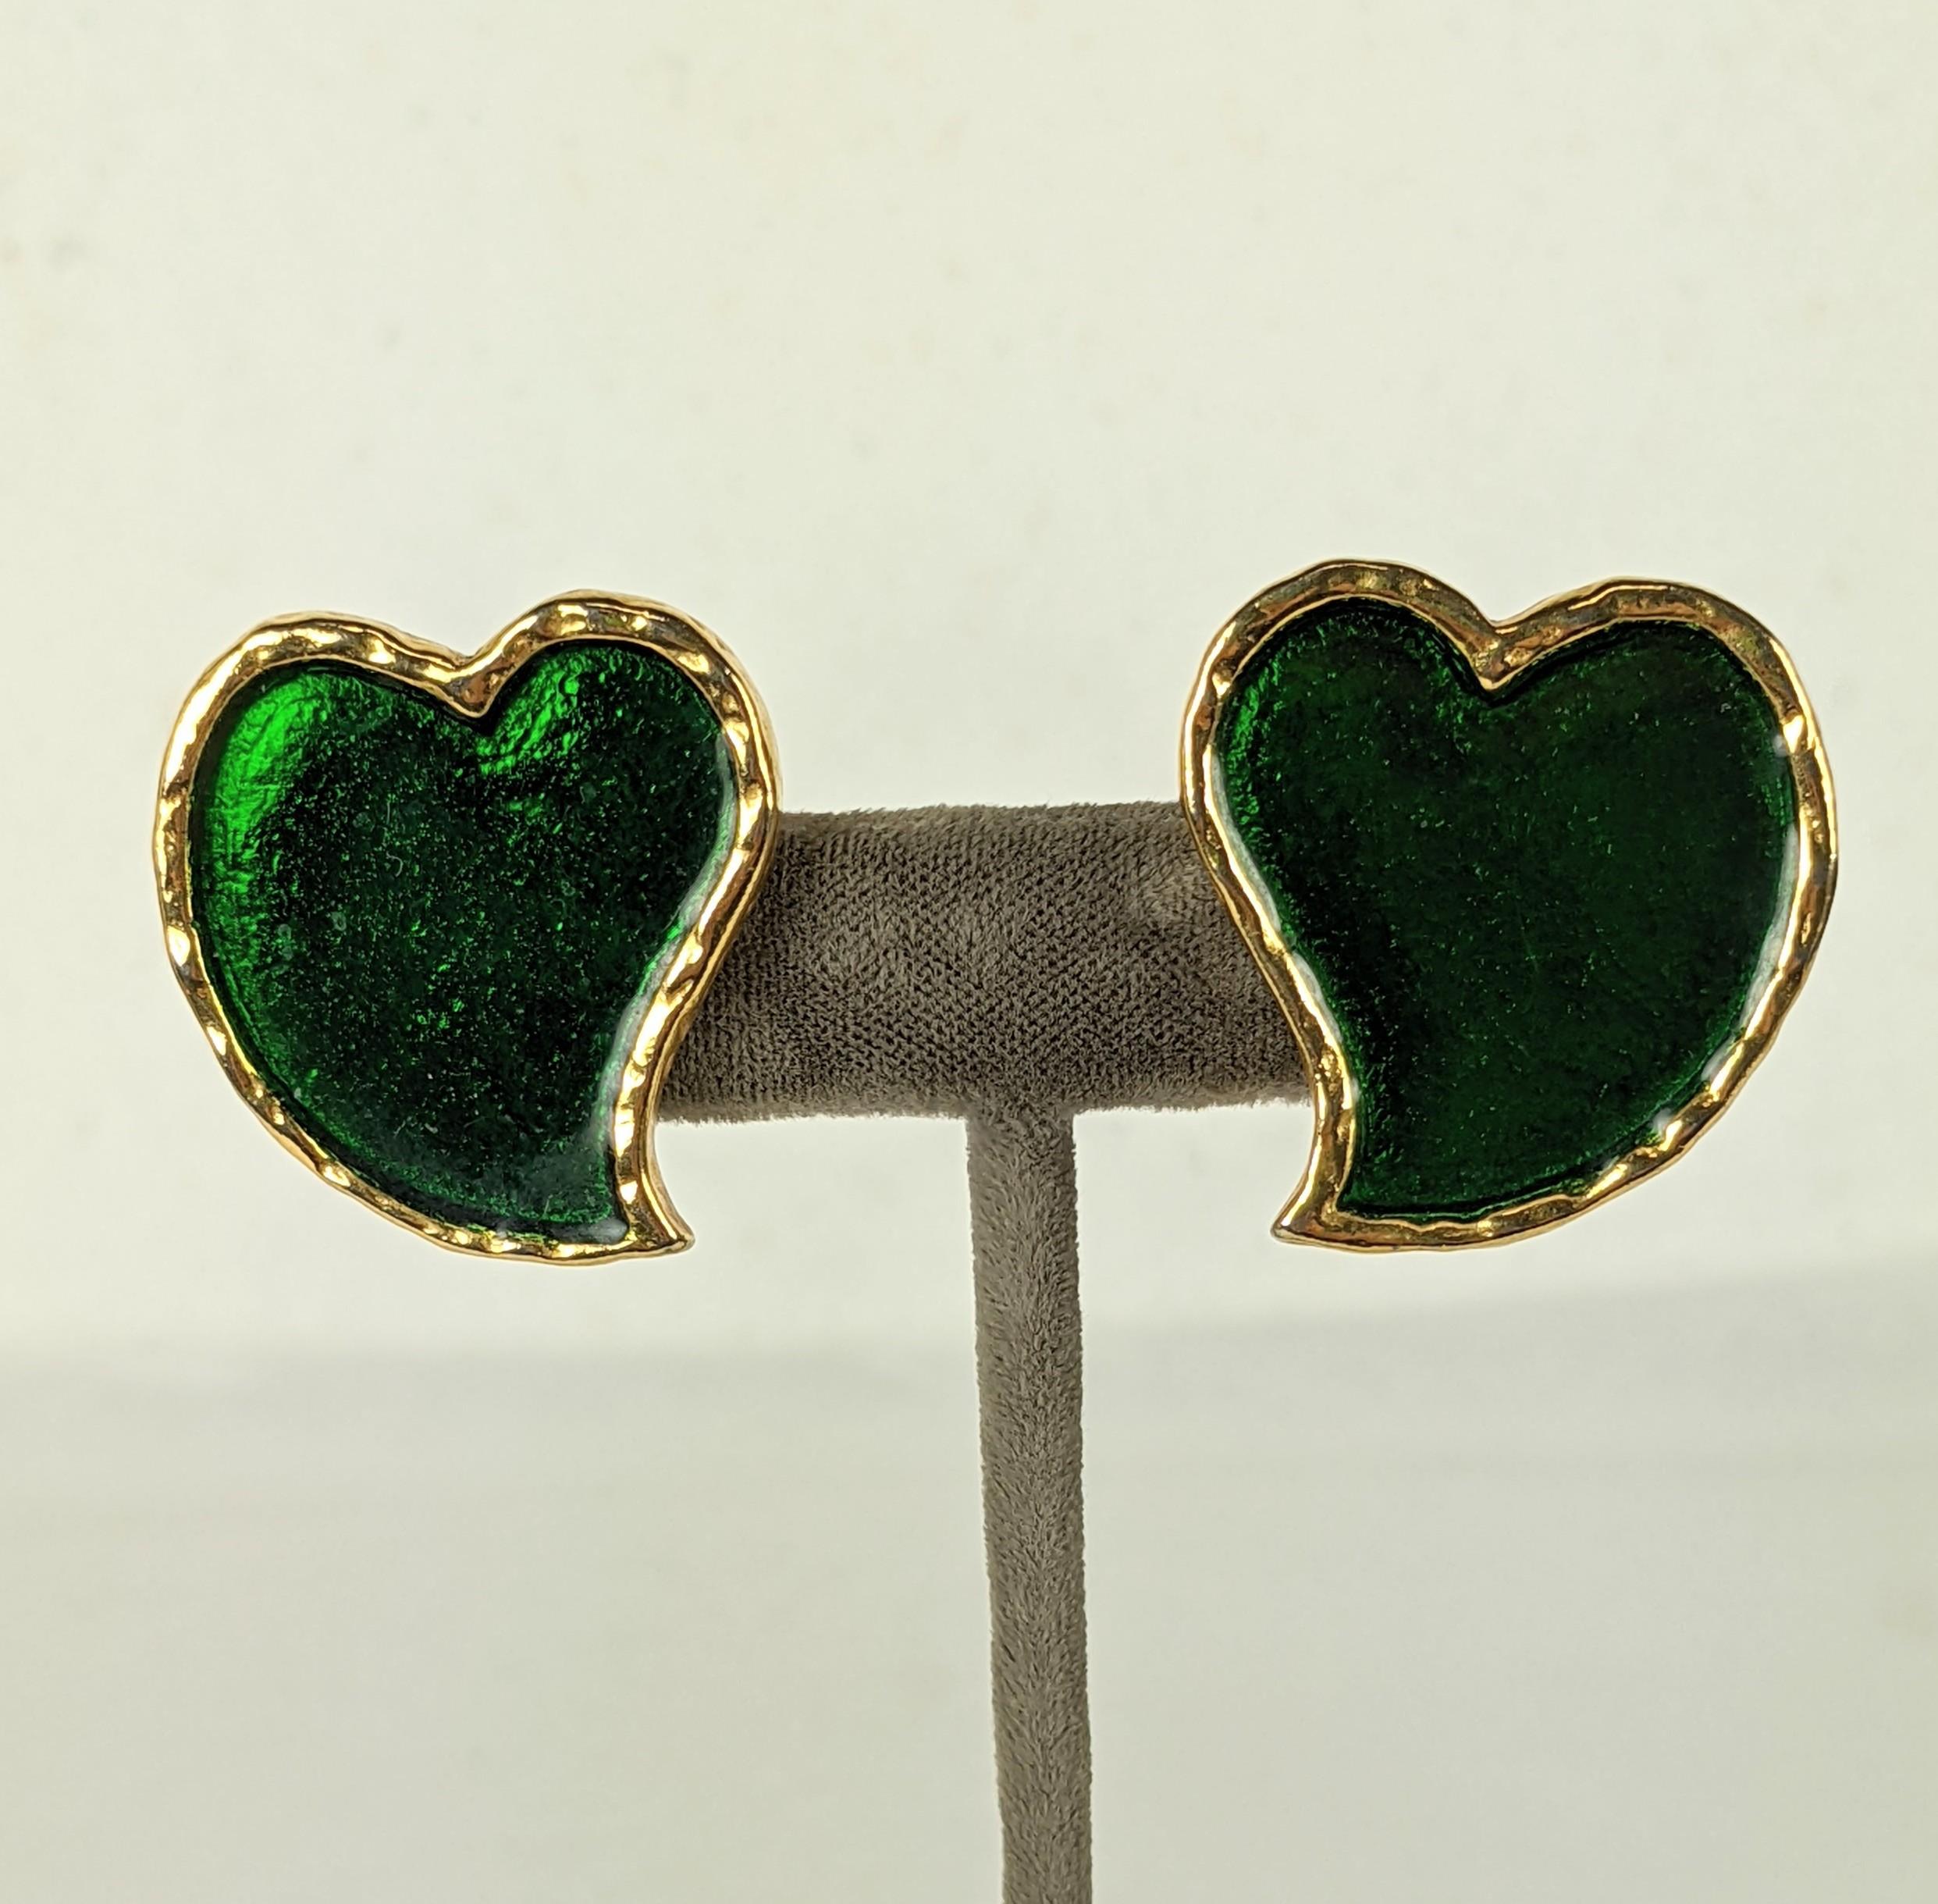 Yves Saint Laurent Iconic Enamel Heart Earrings from the 1980's. Rich emerald green enamel decorates the abstract heart shaped forms by Maison Goossens. 1.25